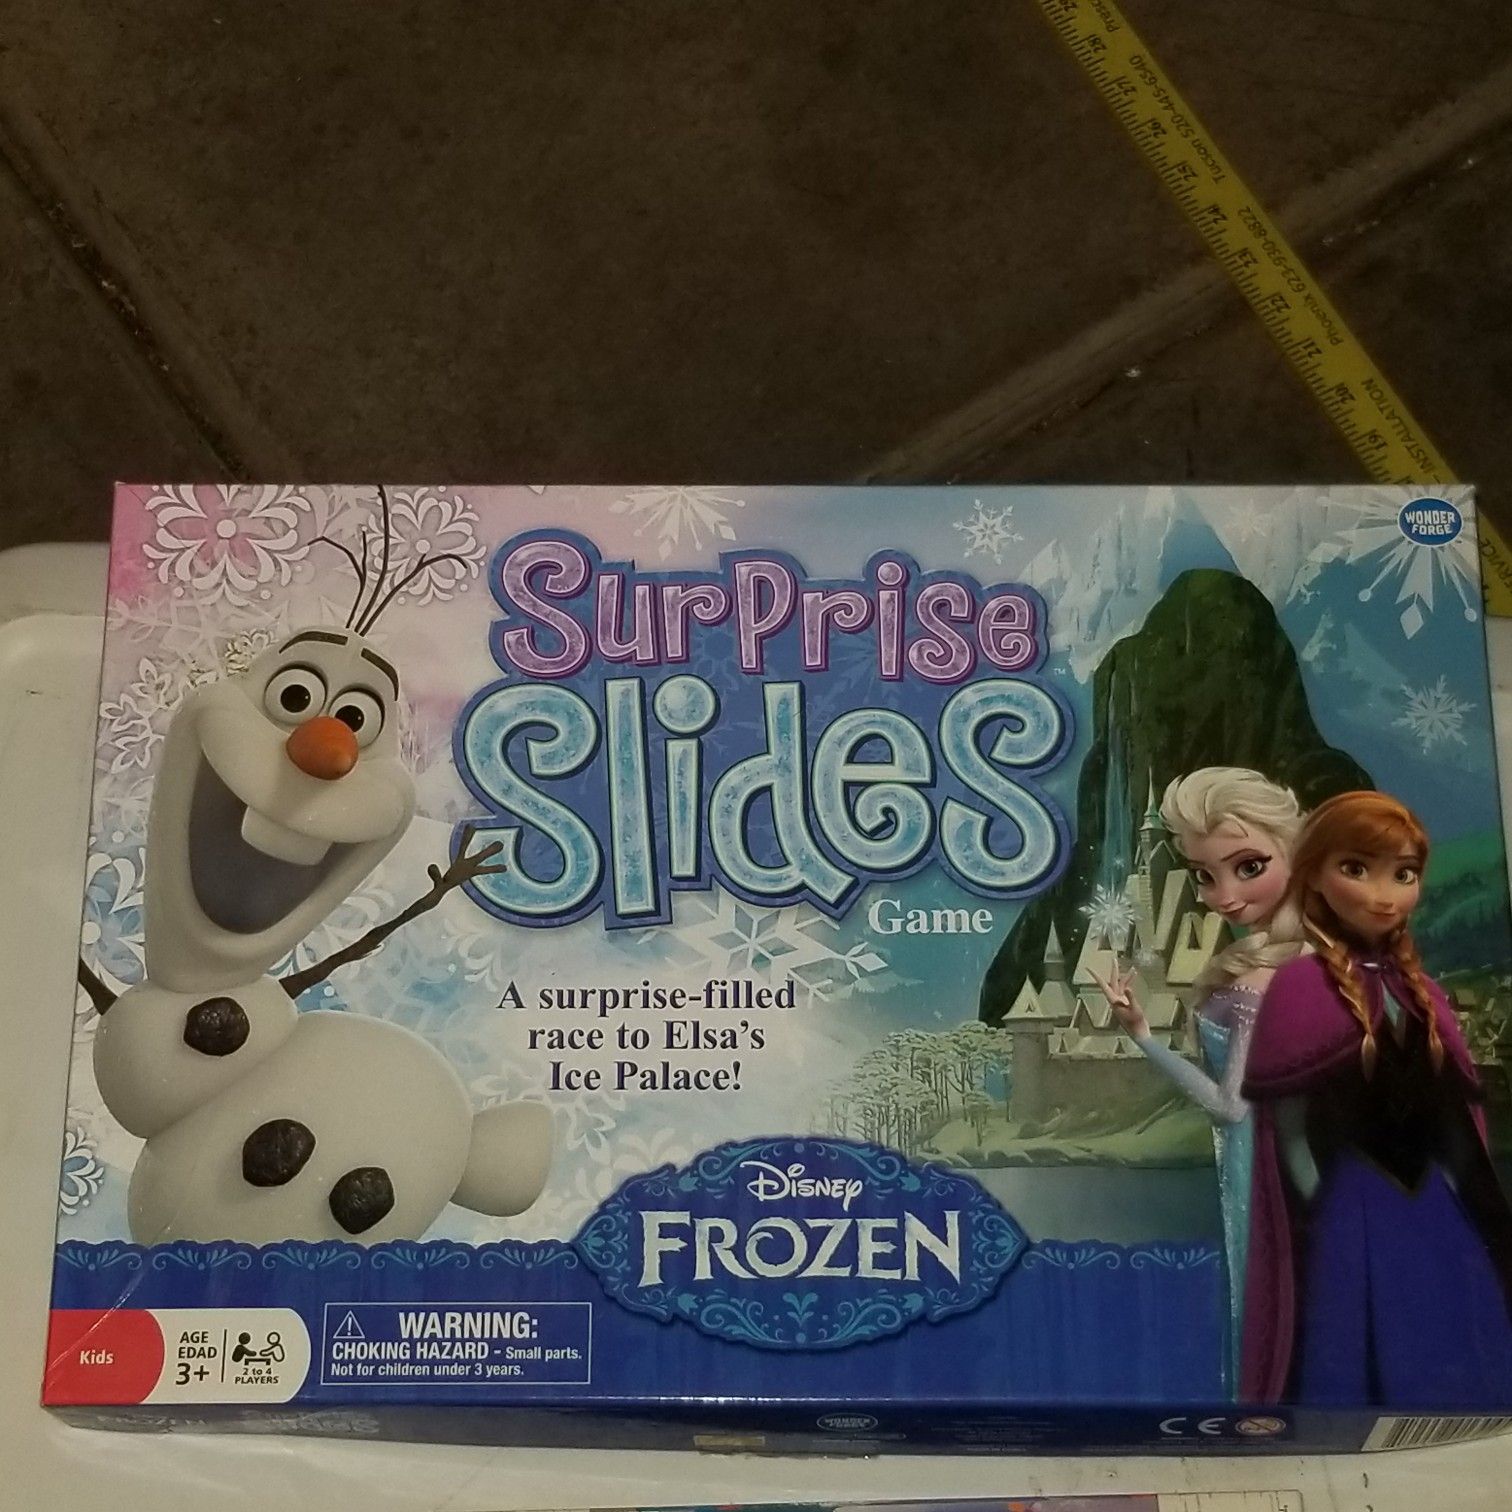 Pending pickup: Frozen surprises and slides game and puzzle